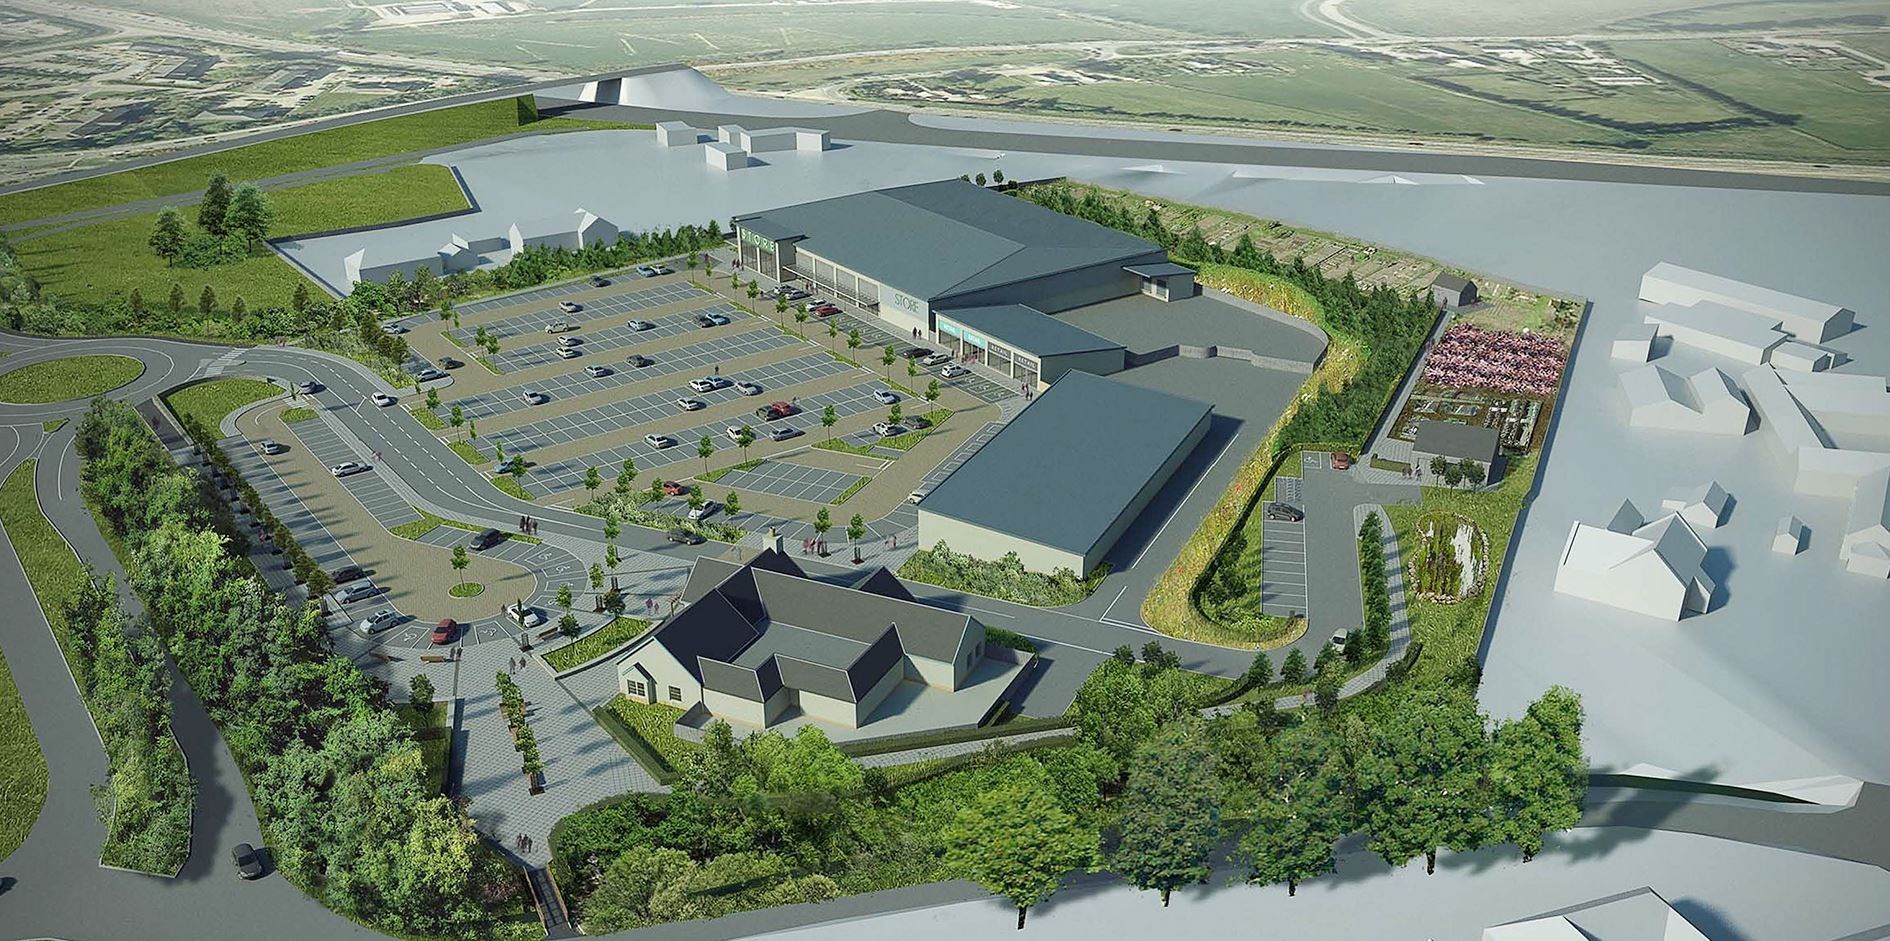 Plans have been submitted for a major expansion of the Inshes Retail Park. in Inverness.